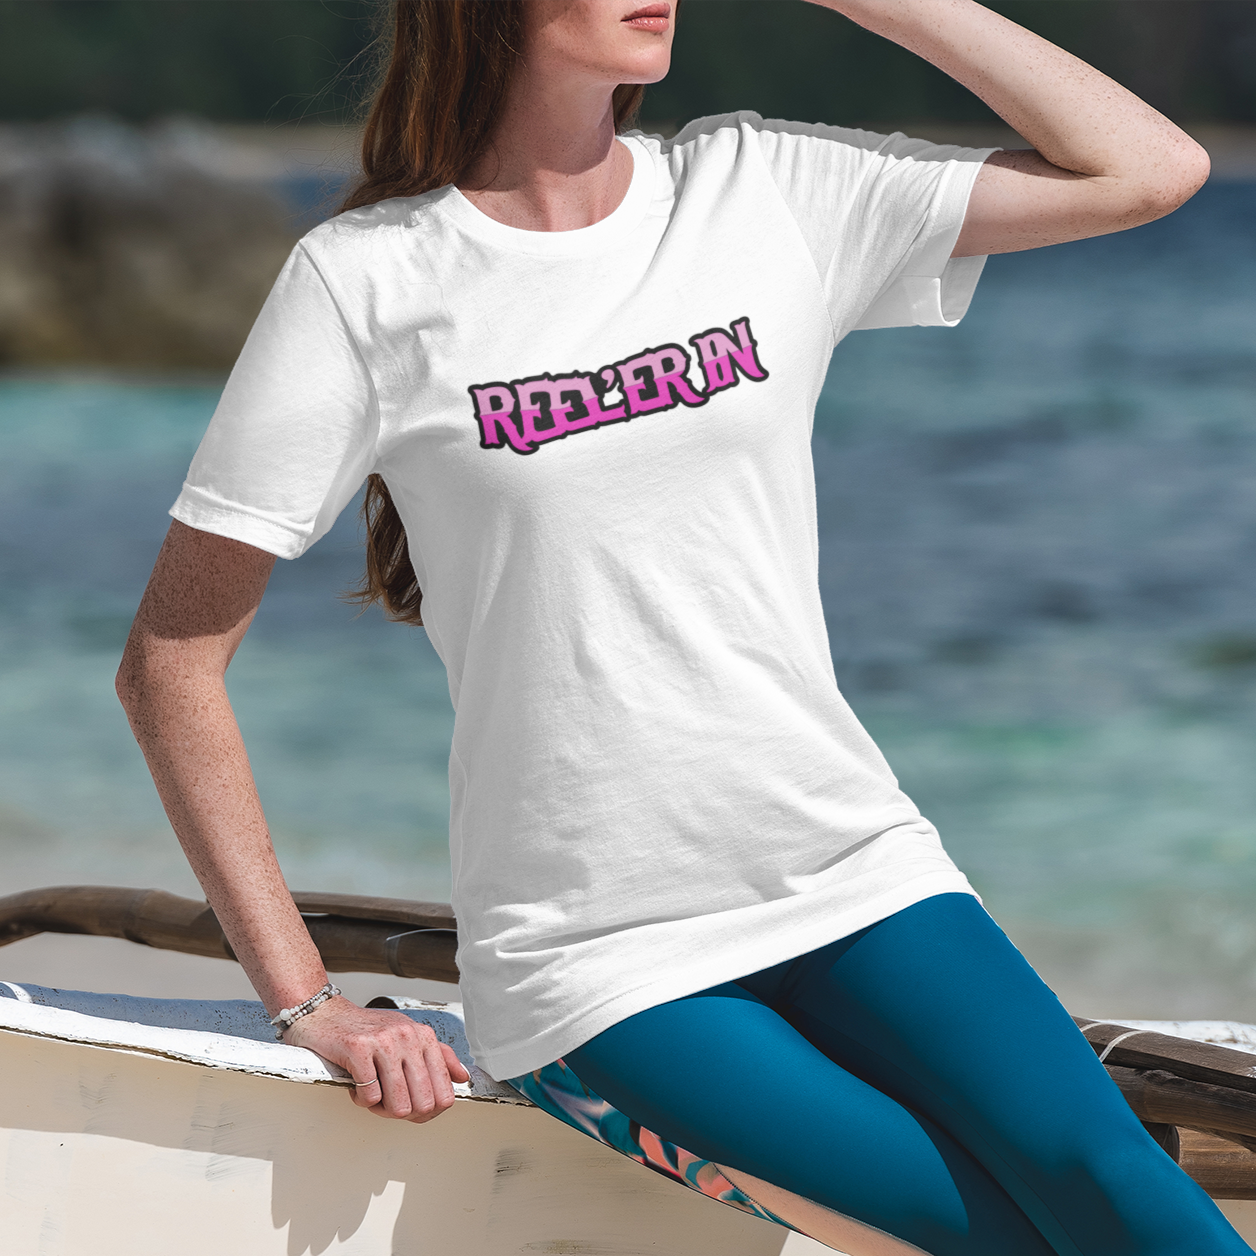 reeler-in-white-t-shirt-mockup-of-a-woman-at-the-beach-on-a-sunny-day-fishing